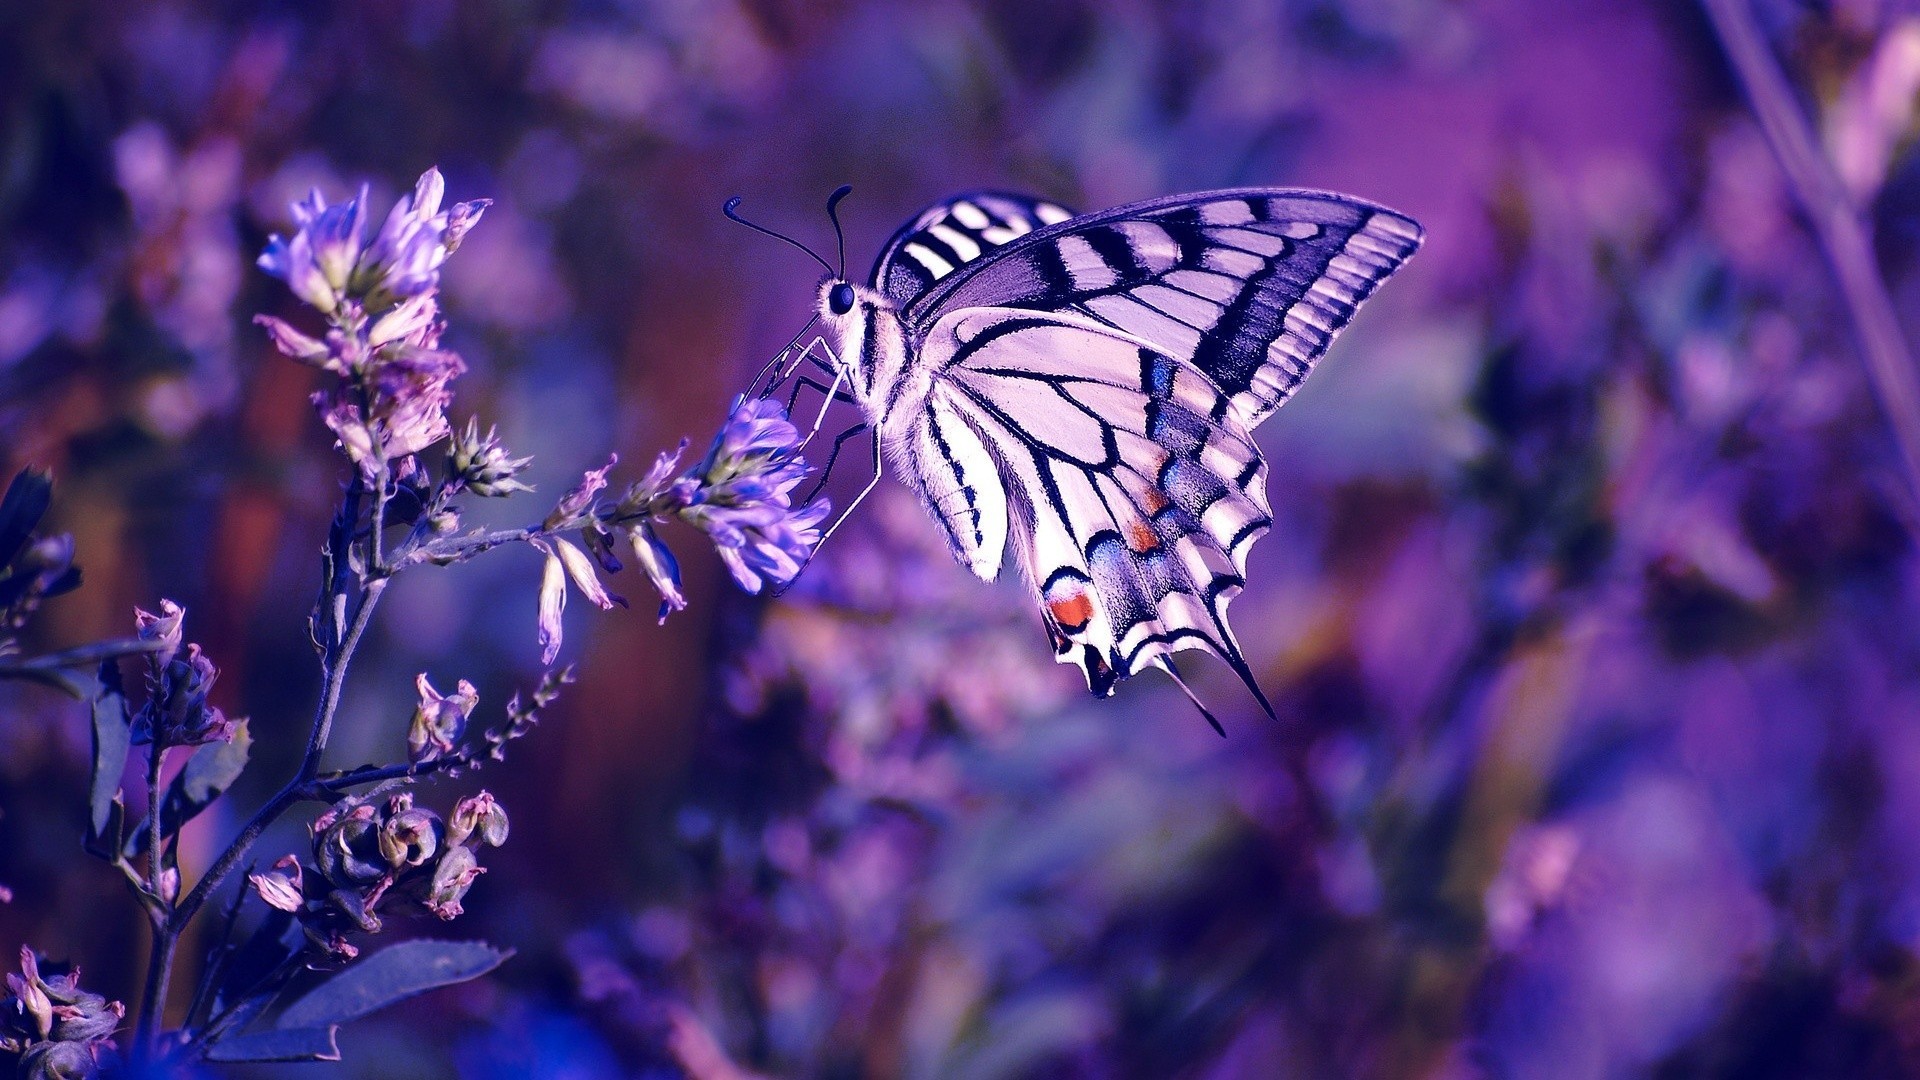 1920x1080  Pretty Butterfly Backgrounds - Wallpaper Cave | Epic Car  Wallpapers | Pinterest | Wallpaper, Butterfly wallpaper and 3d wallpaper